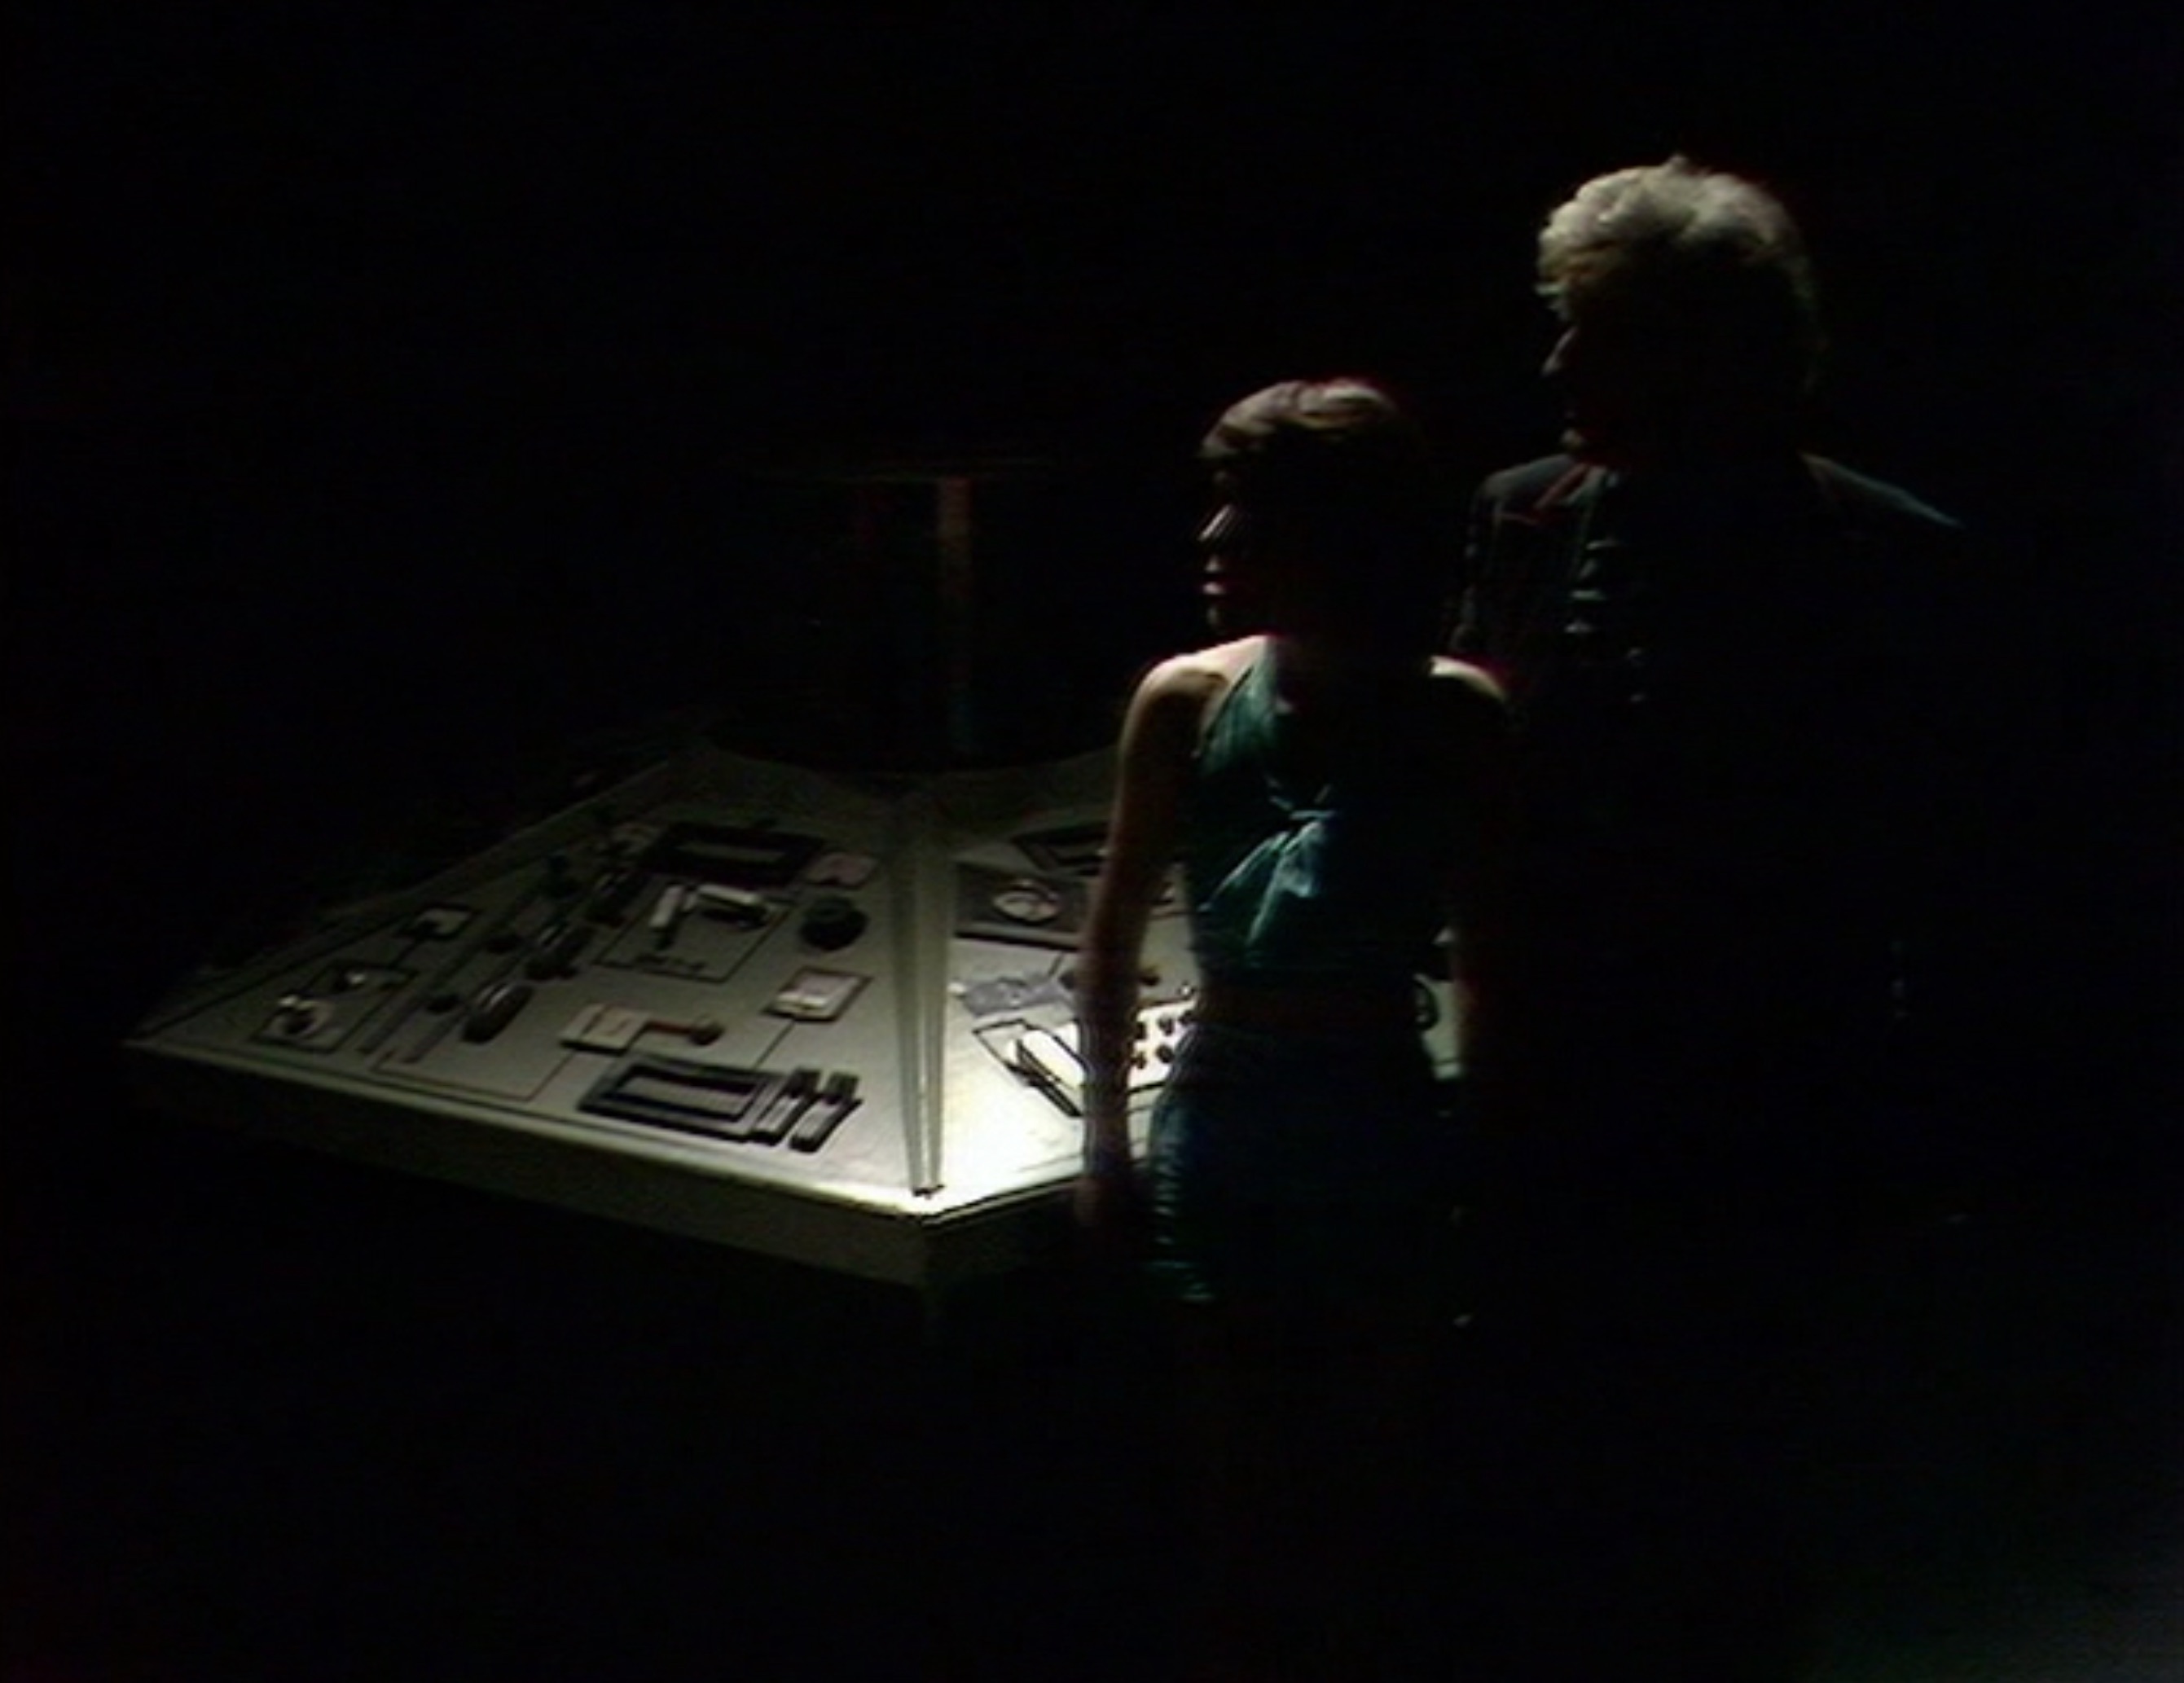 The Doctor and Sarah stand in the gloom of a powered down TARDIS. (TV: Death to the Daleks [+]Loading...["Death to the Daleks (TV story)"])